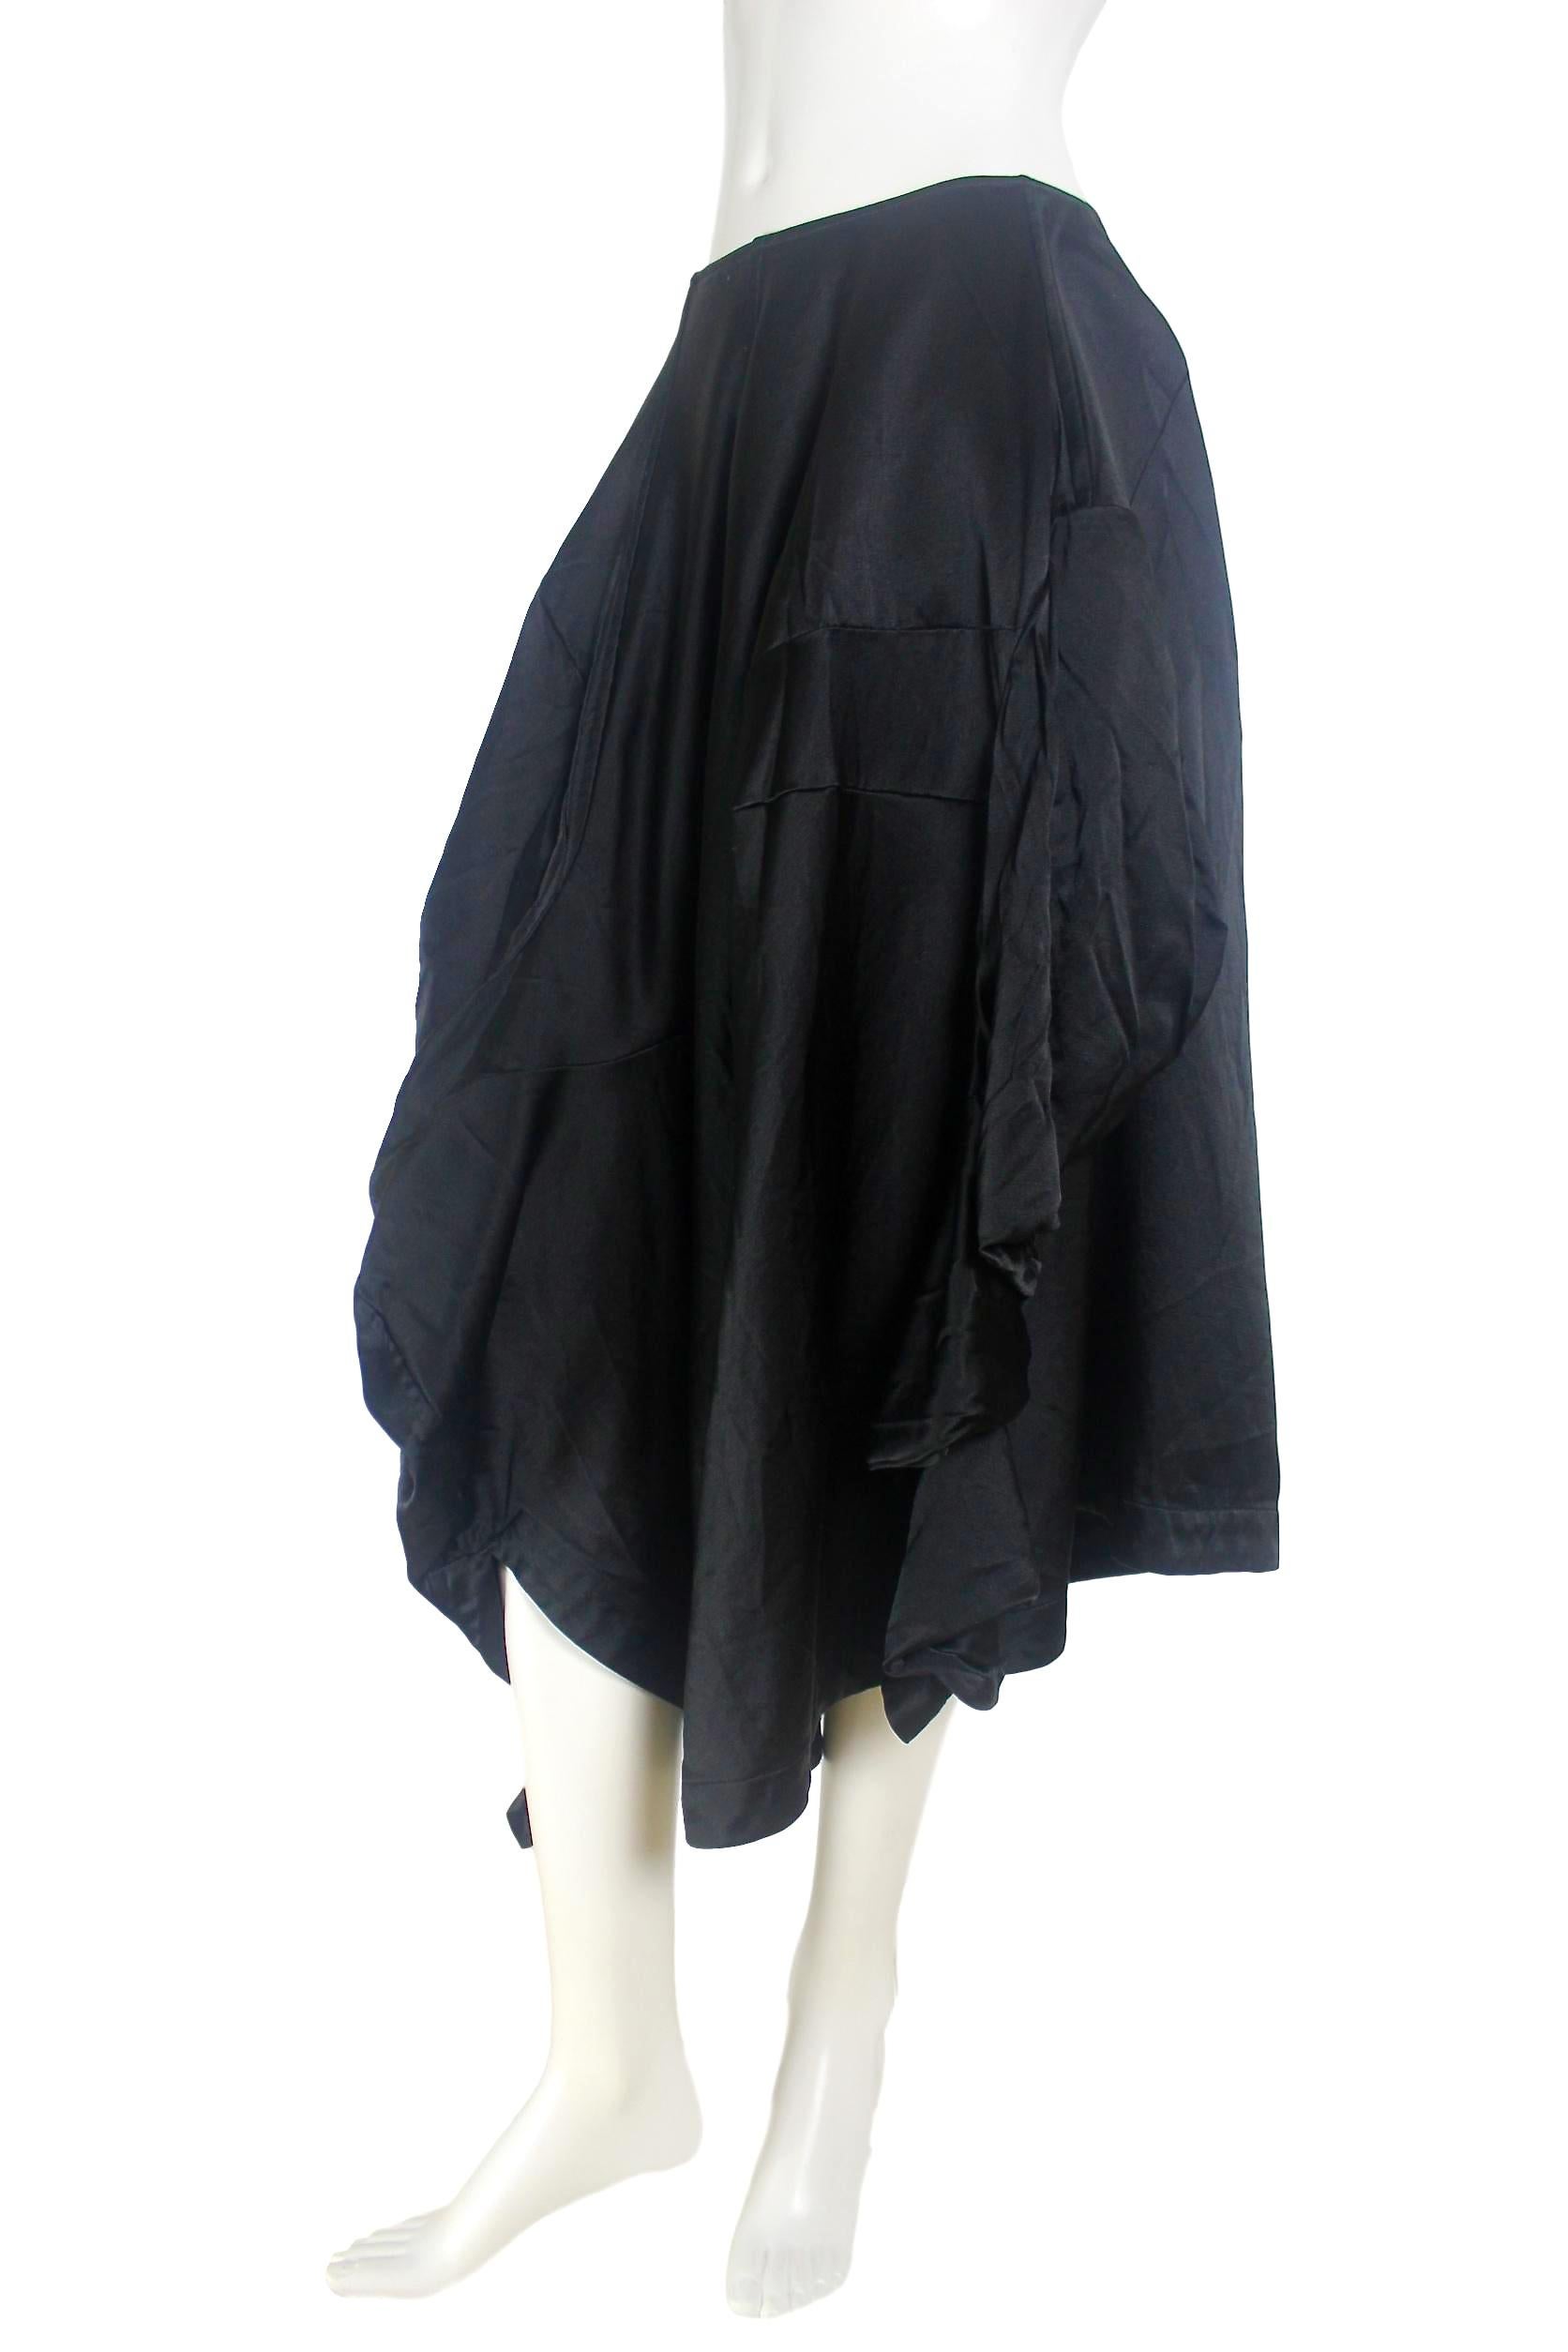 Comme des Garcons Wool/Silk Twisted Sleeve Skirt AD 2004 Dark Romance For Sale 10